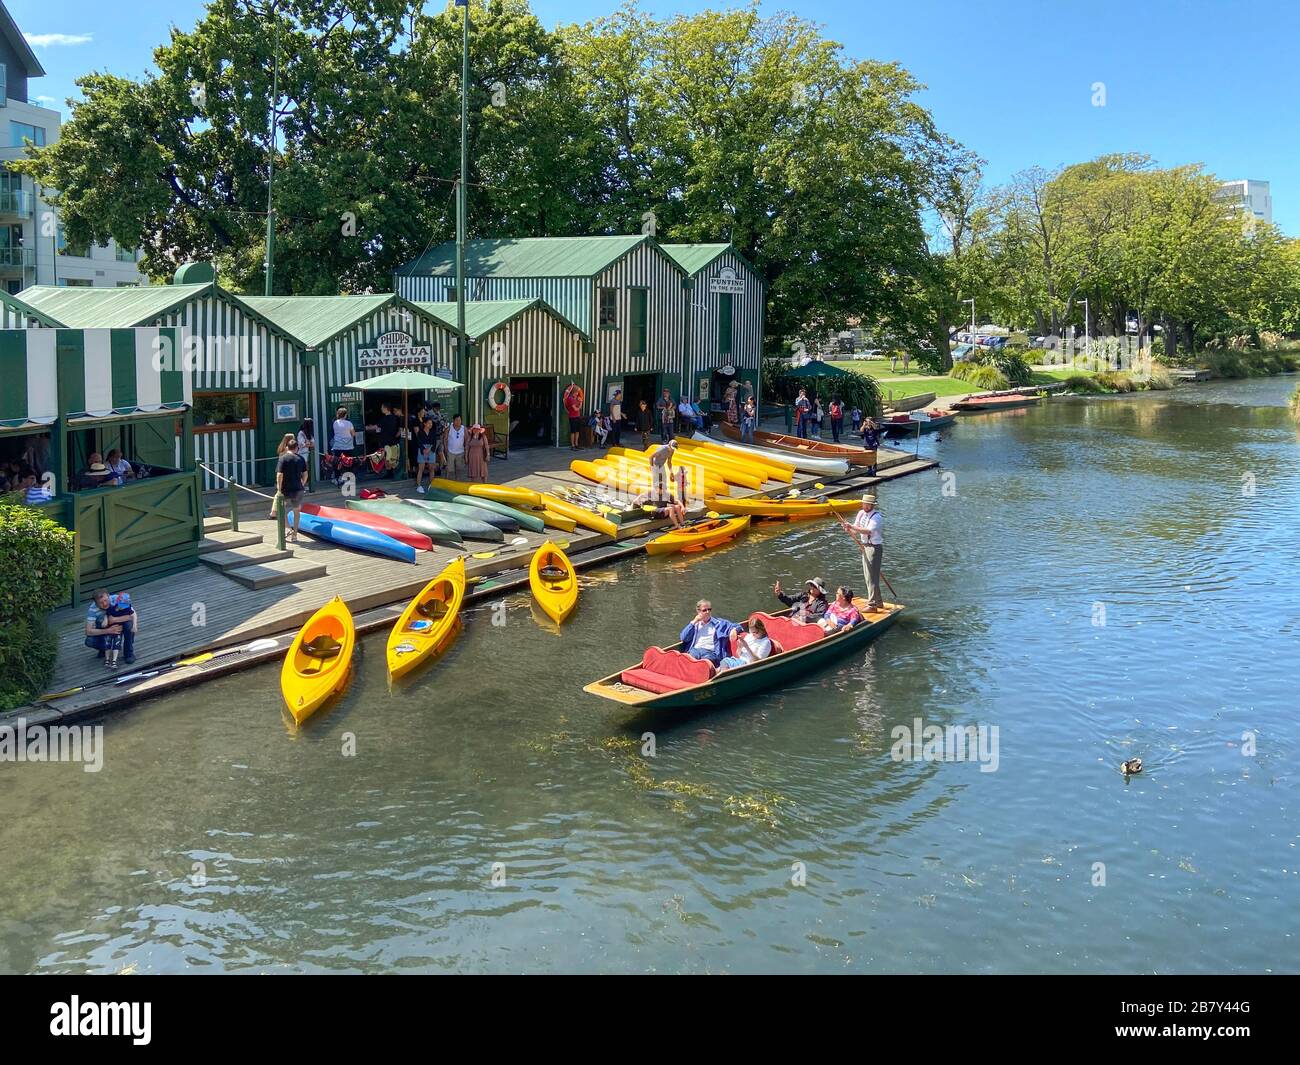 Punting on River Avon at Antigua Boat Sheds, Cambridge Terrace, Christchurch, Canterbury Region, New Zealand Stock Photo